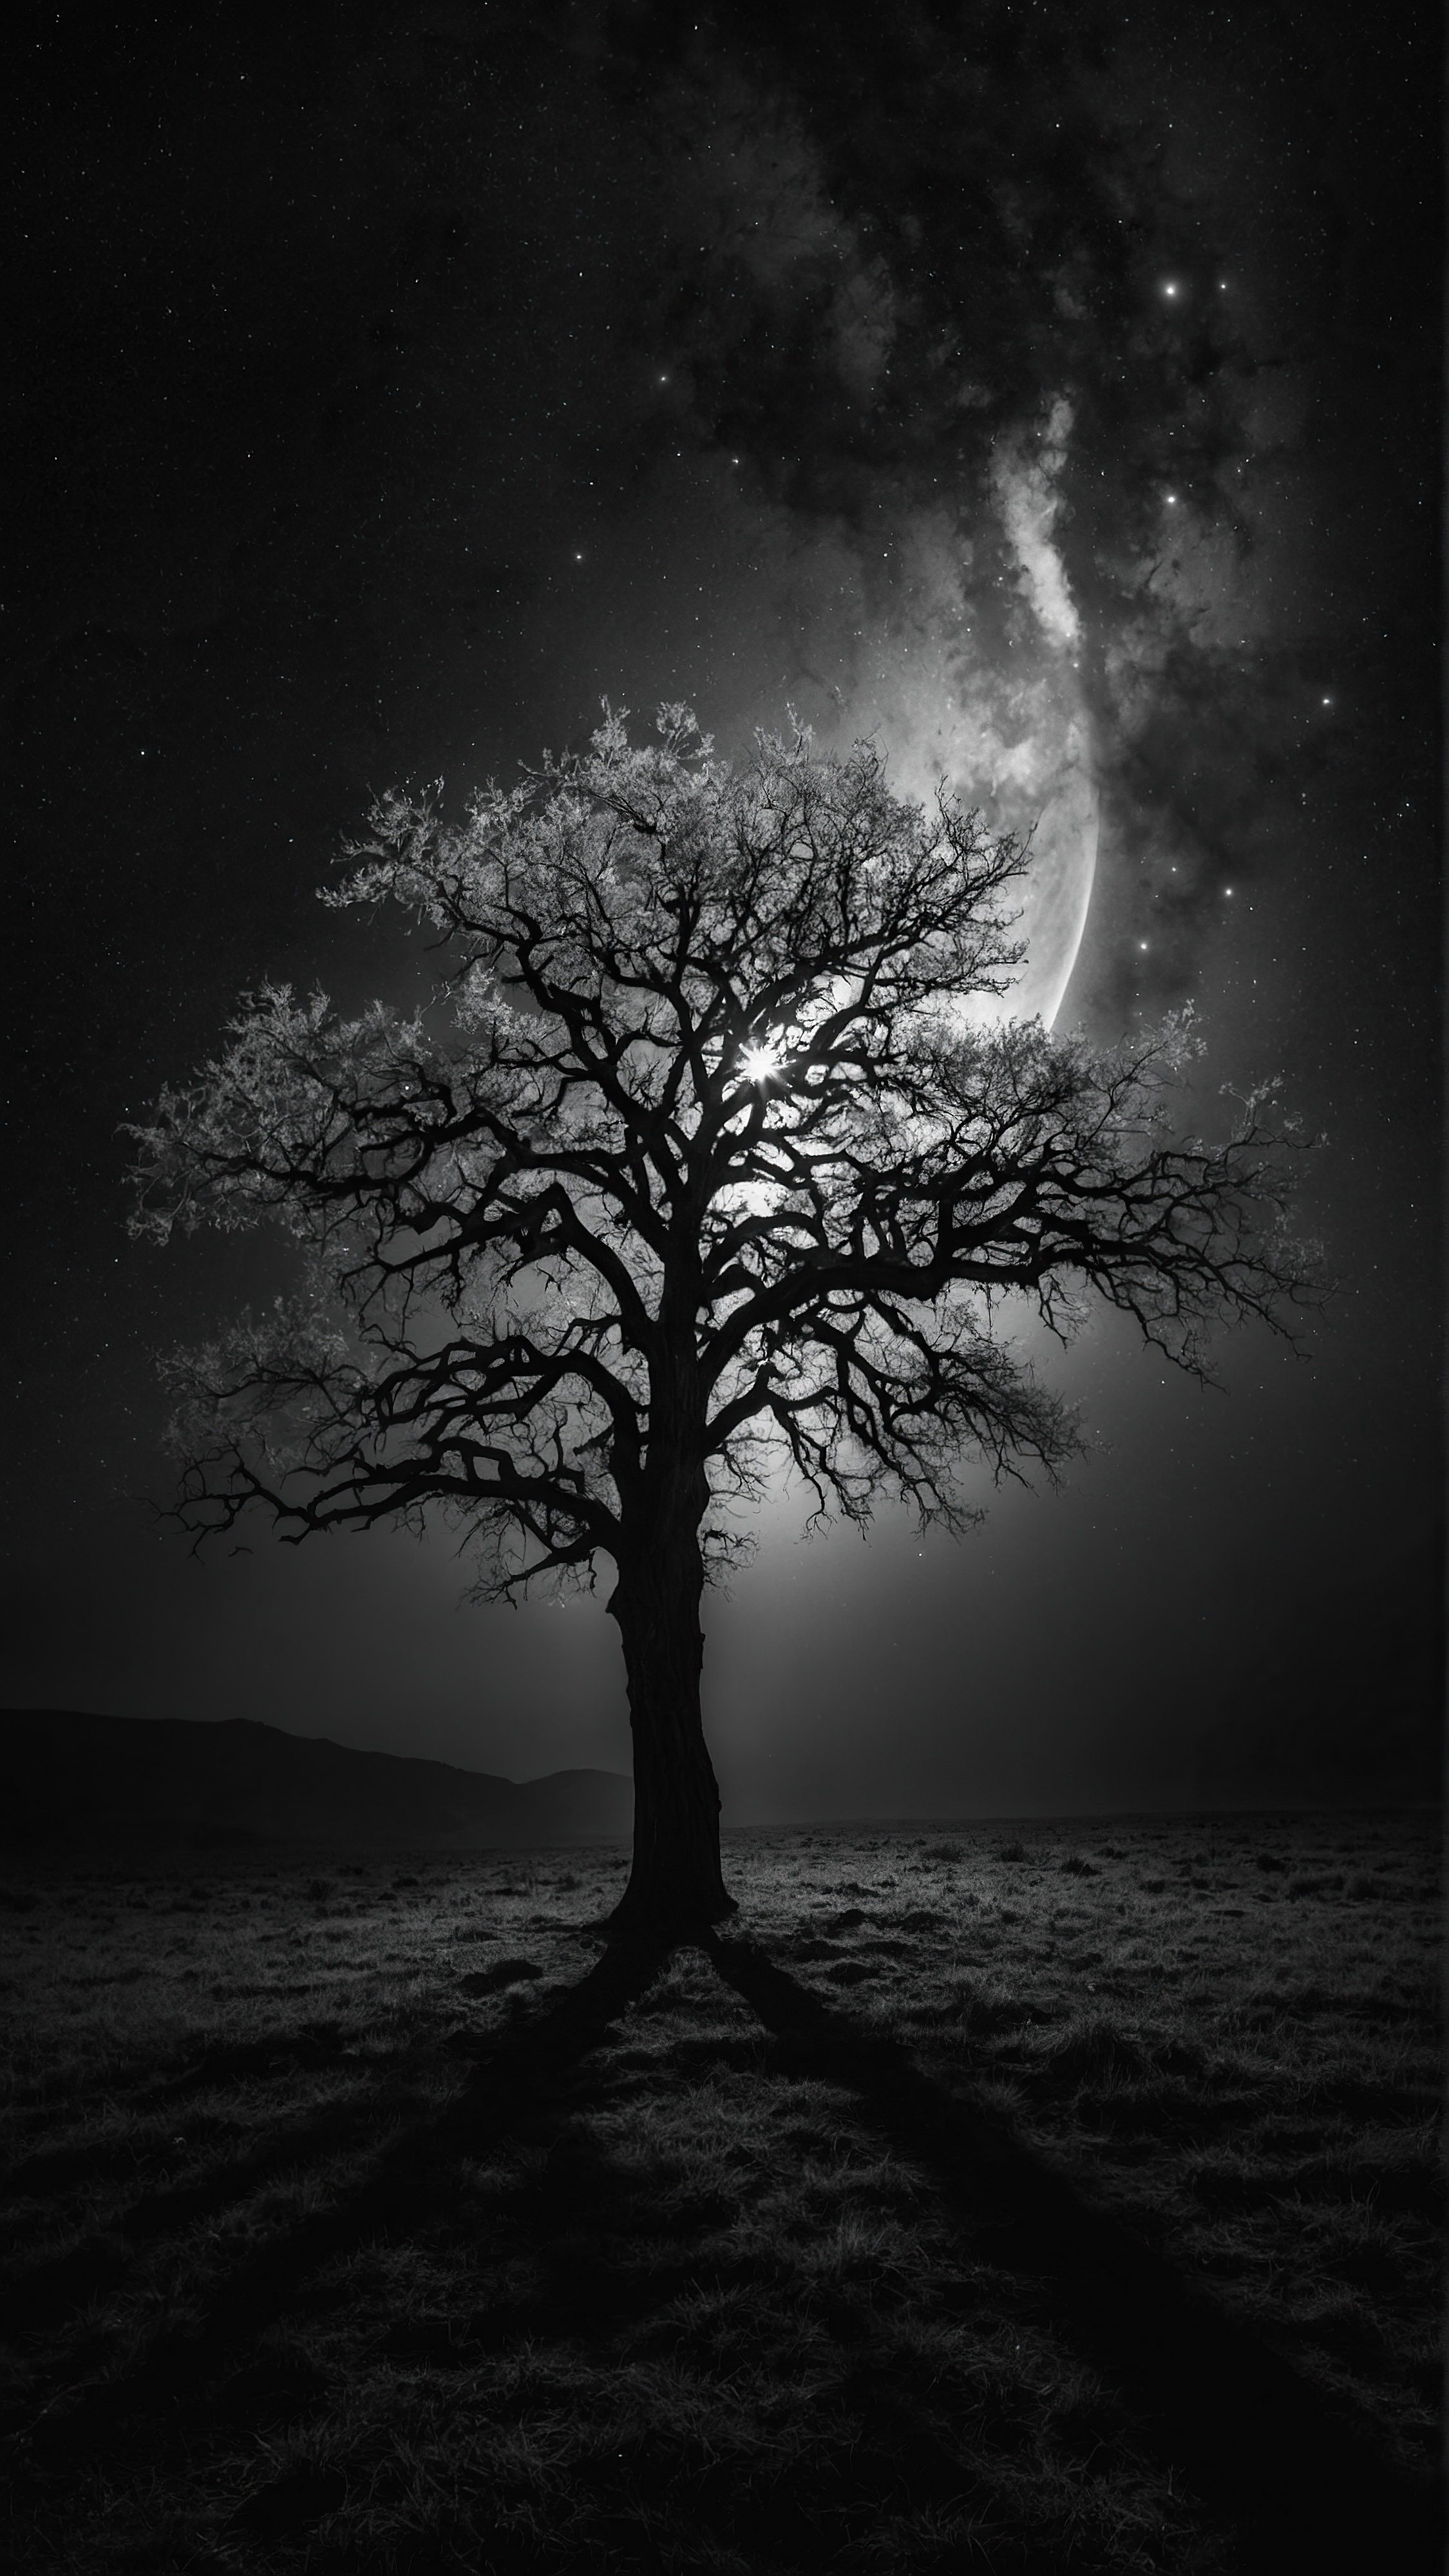 Get lost in the magic of our black screensaver for iPhone, depicting a surreal scene of a bright, illuminated tree in front of a dark celestial body, creating an ethereal and mystical atmosphere.